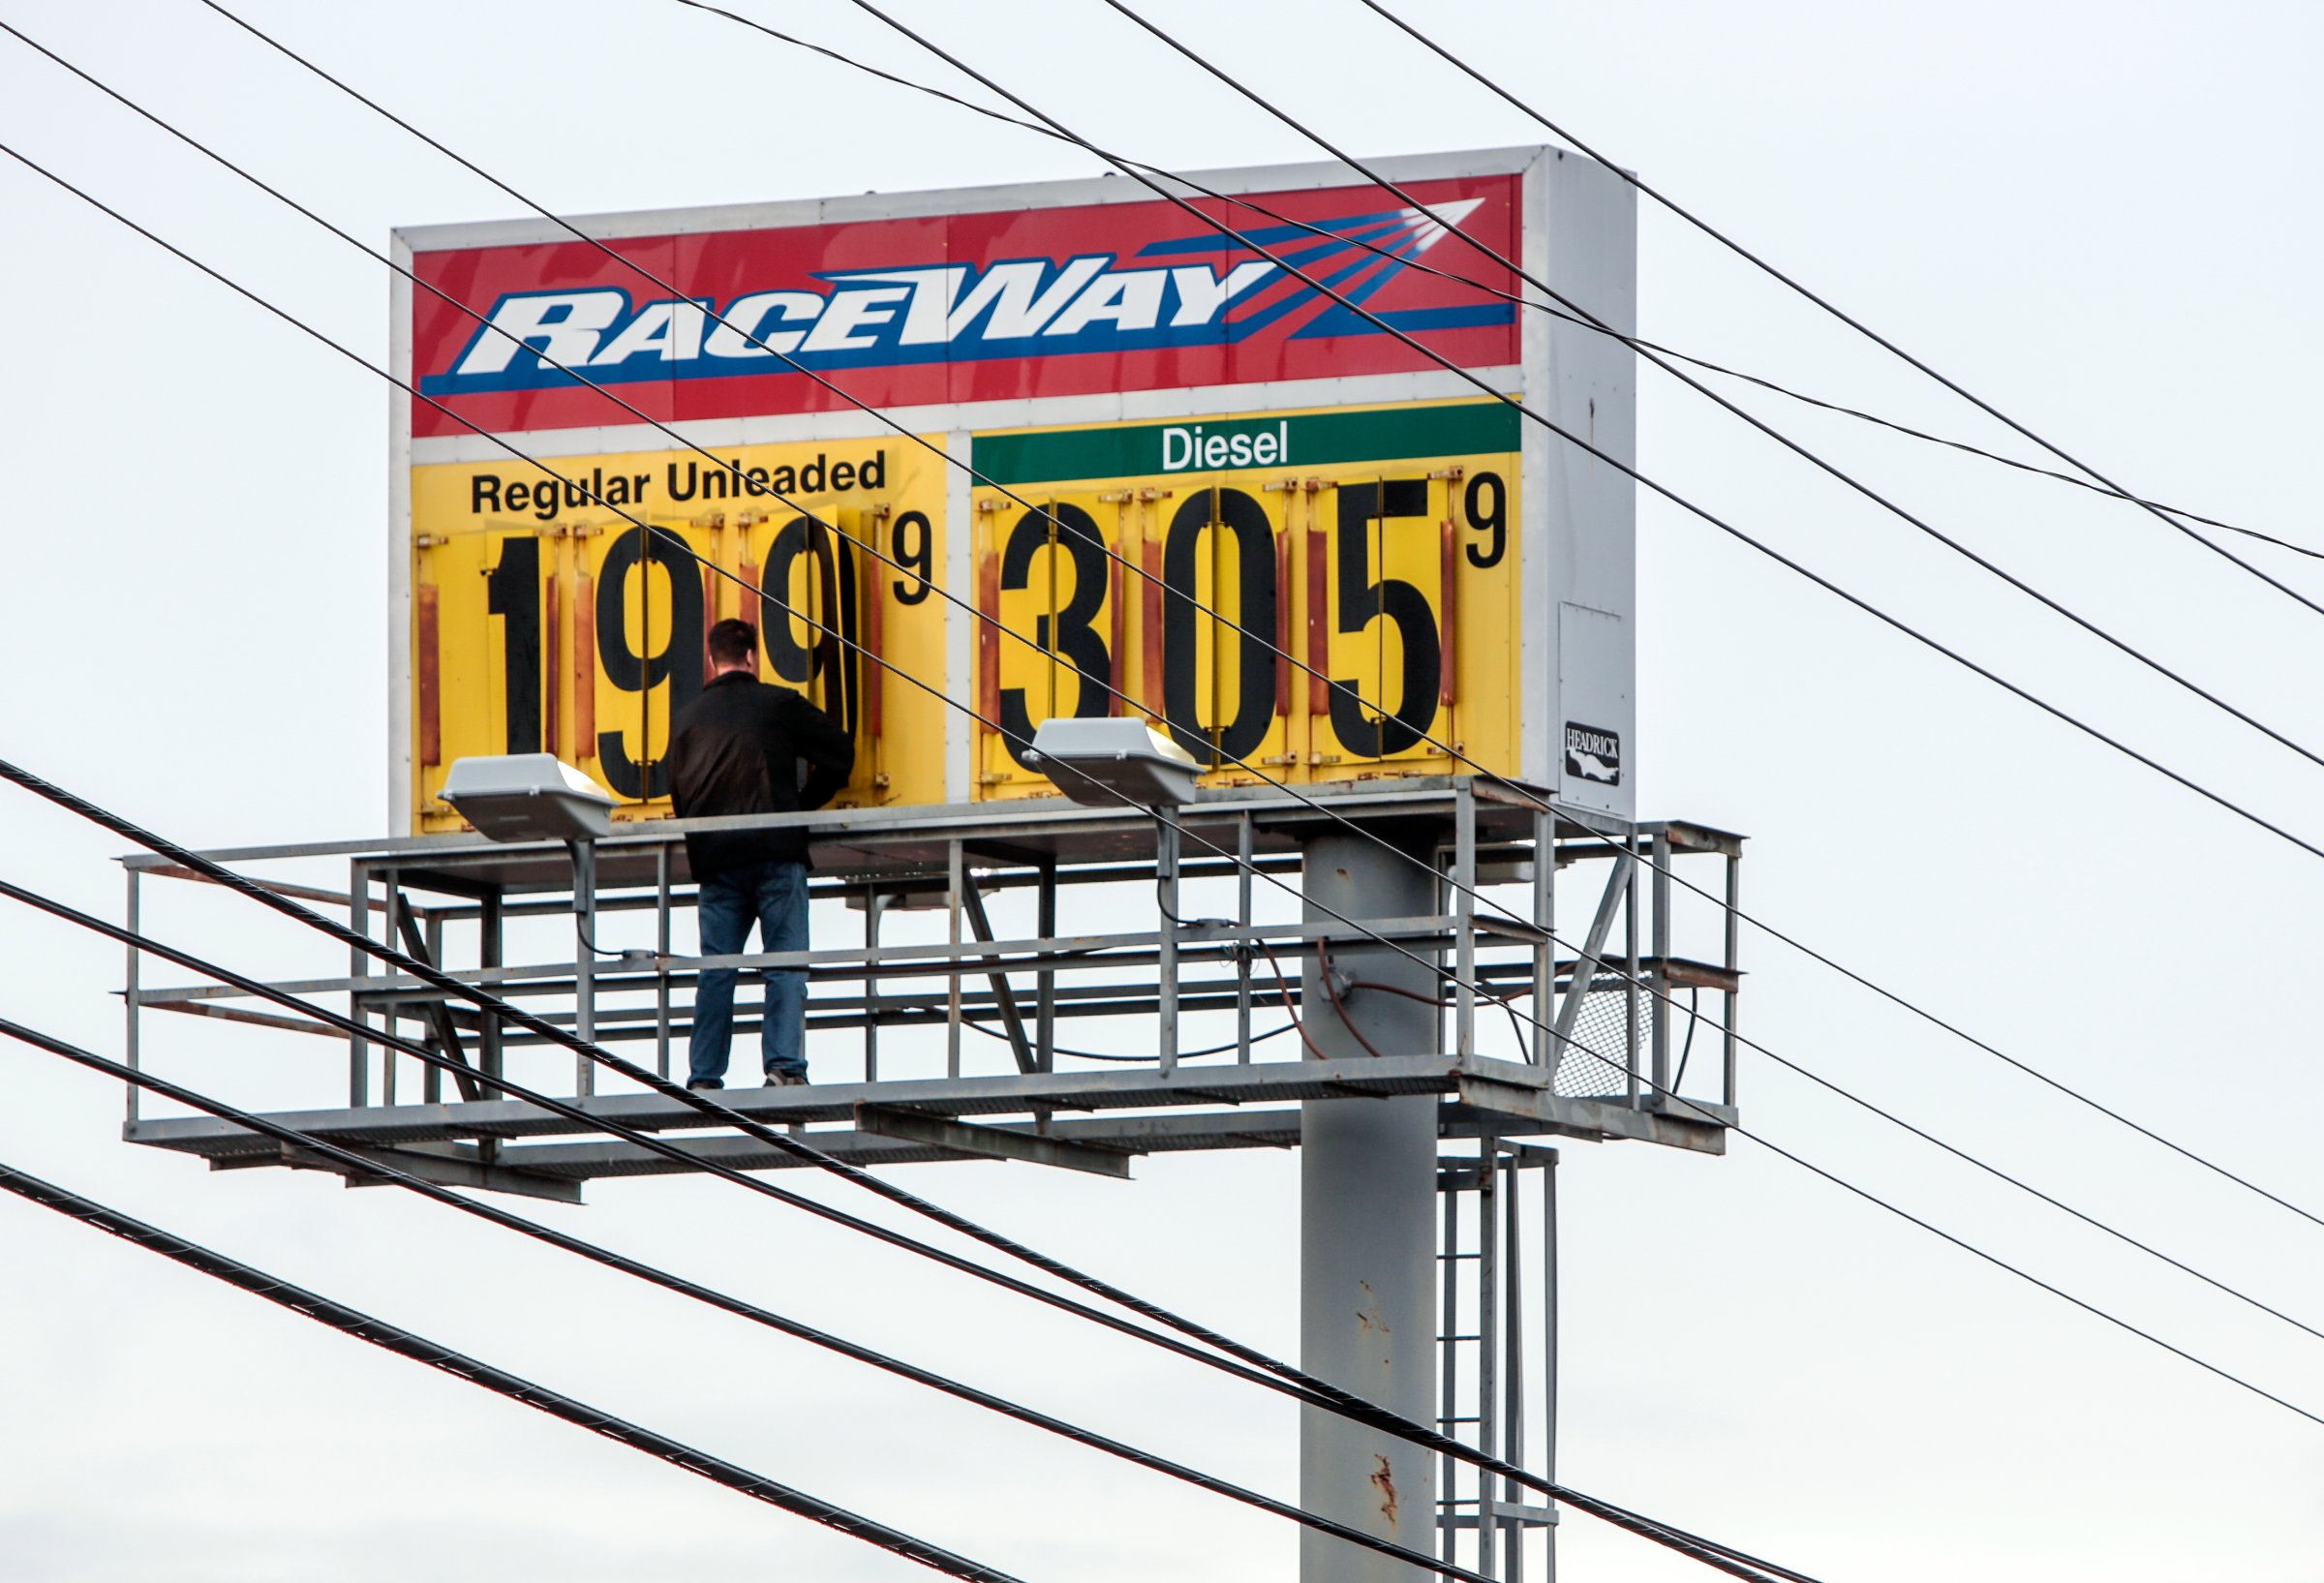 Mark Monaham, owner of the Raceway gas station in McComb, Miss., changes his fuel price billboard, Friday, Dec. 19, 2014. Gas prices throughout the region continue to fall as oil prices plummet.